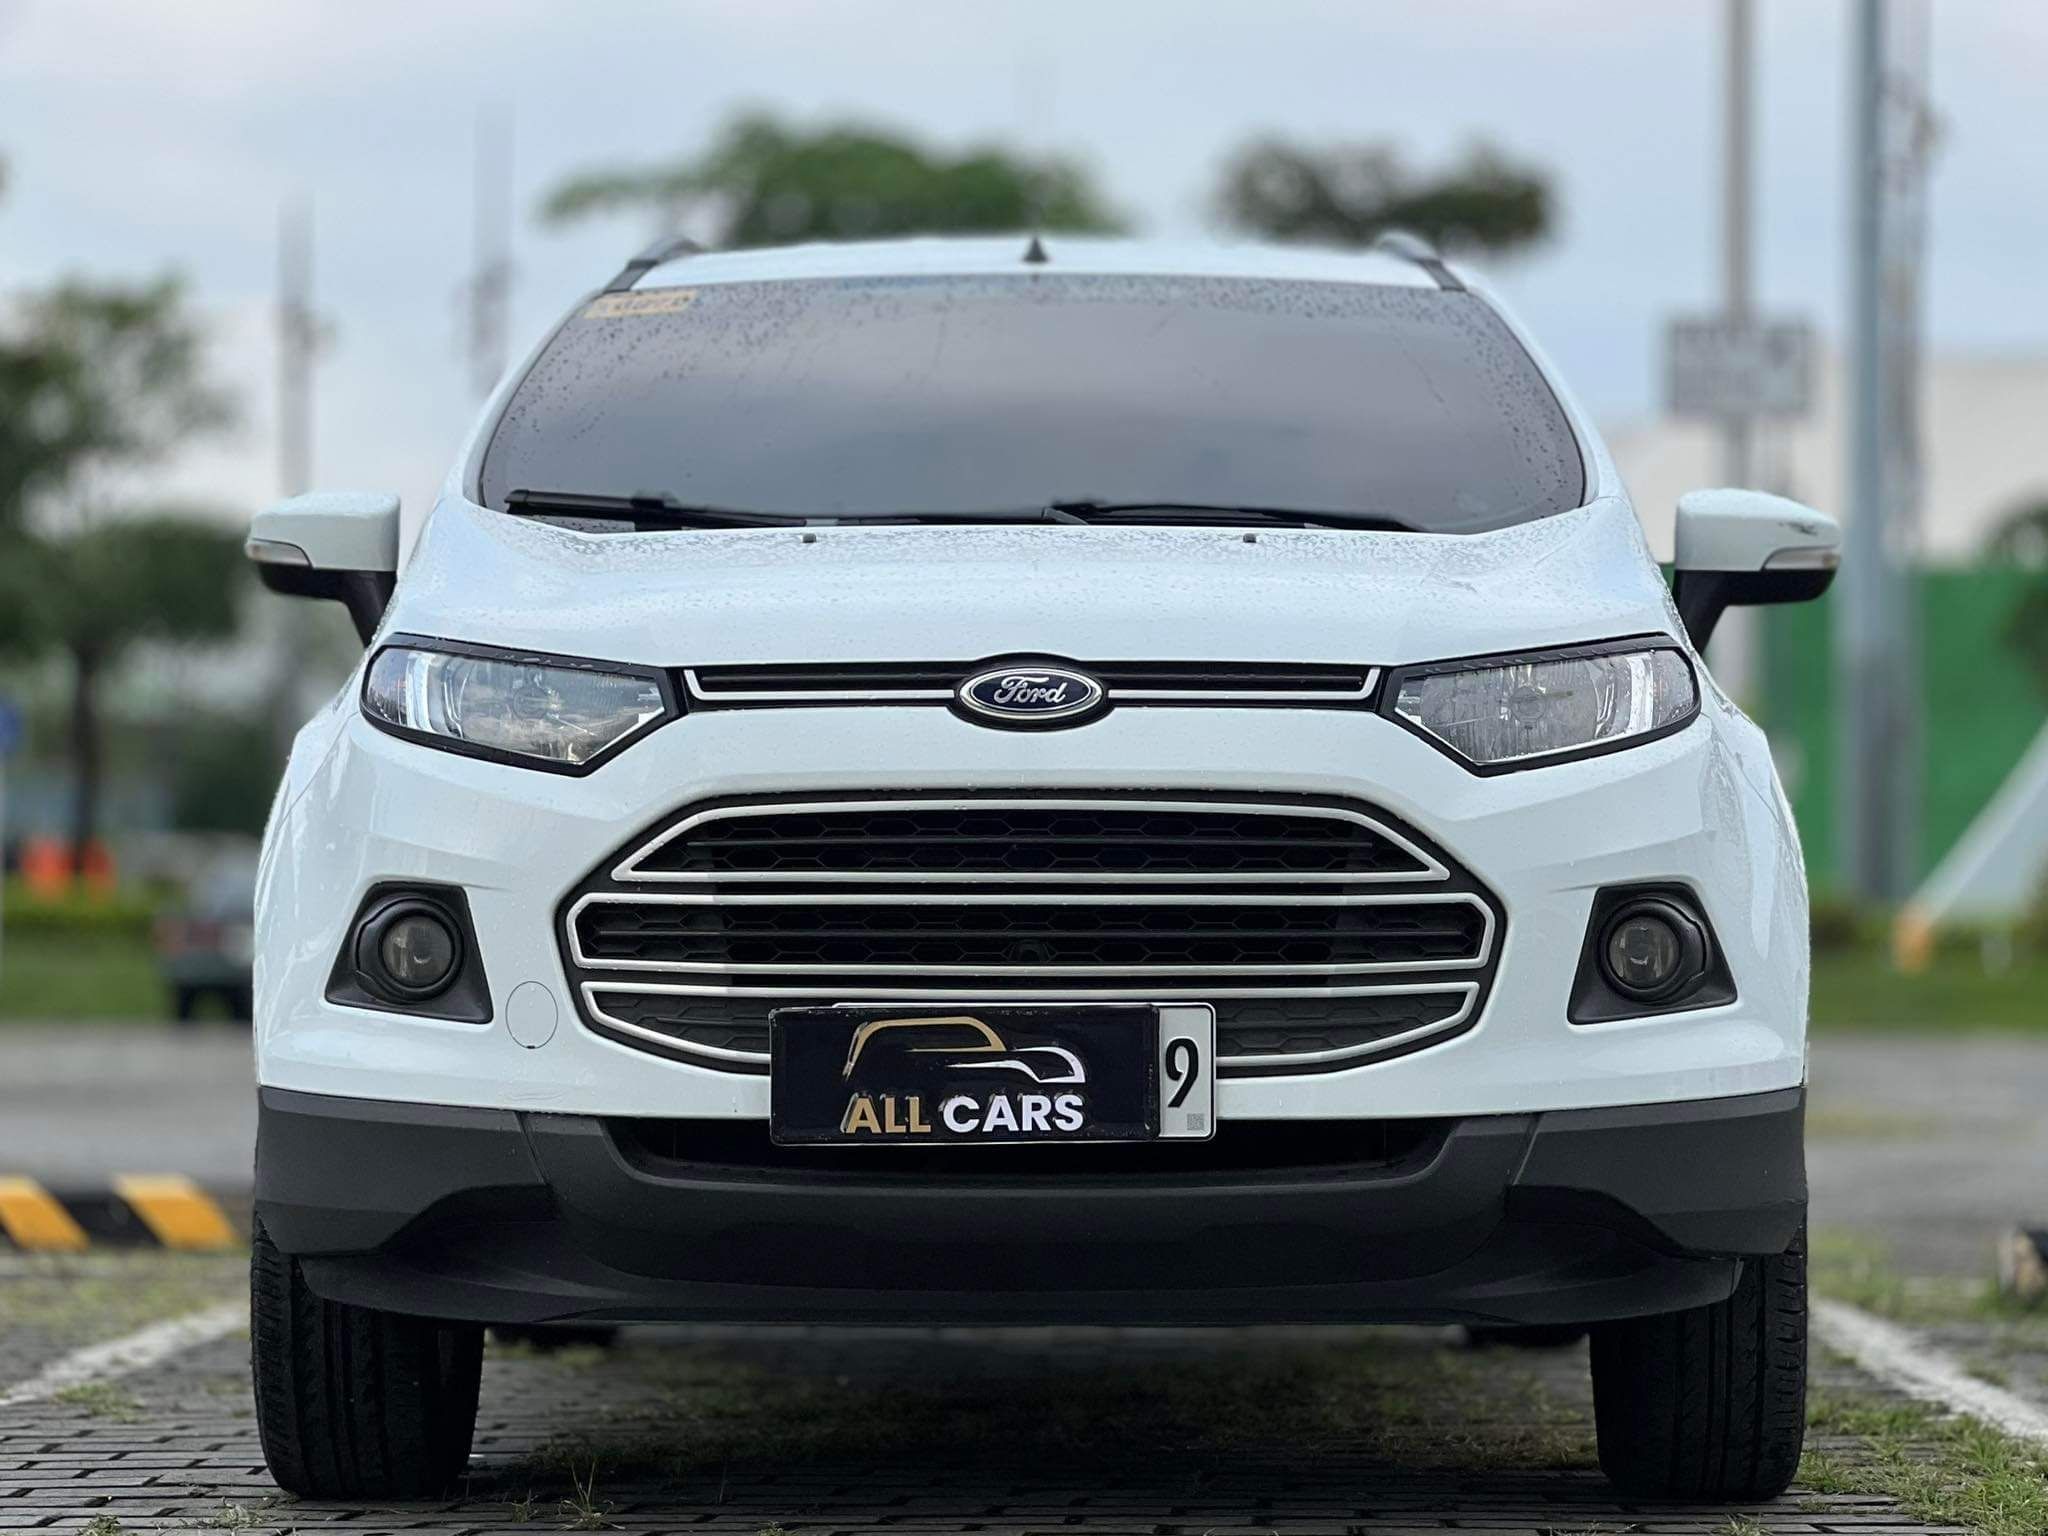 Used 2015 Ford Ecosport 1.5 L Trend MT